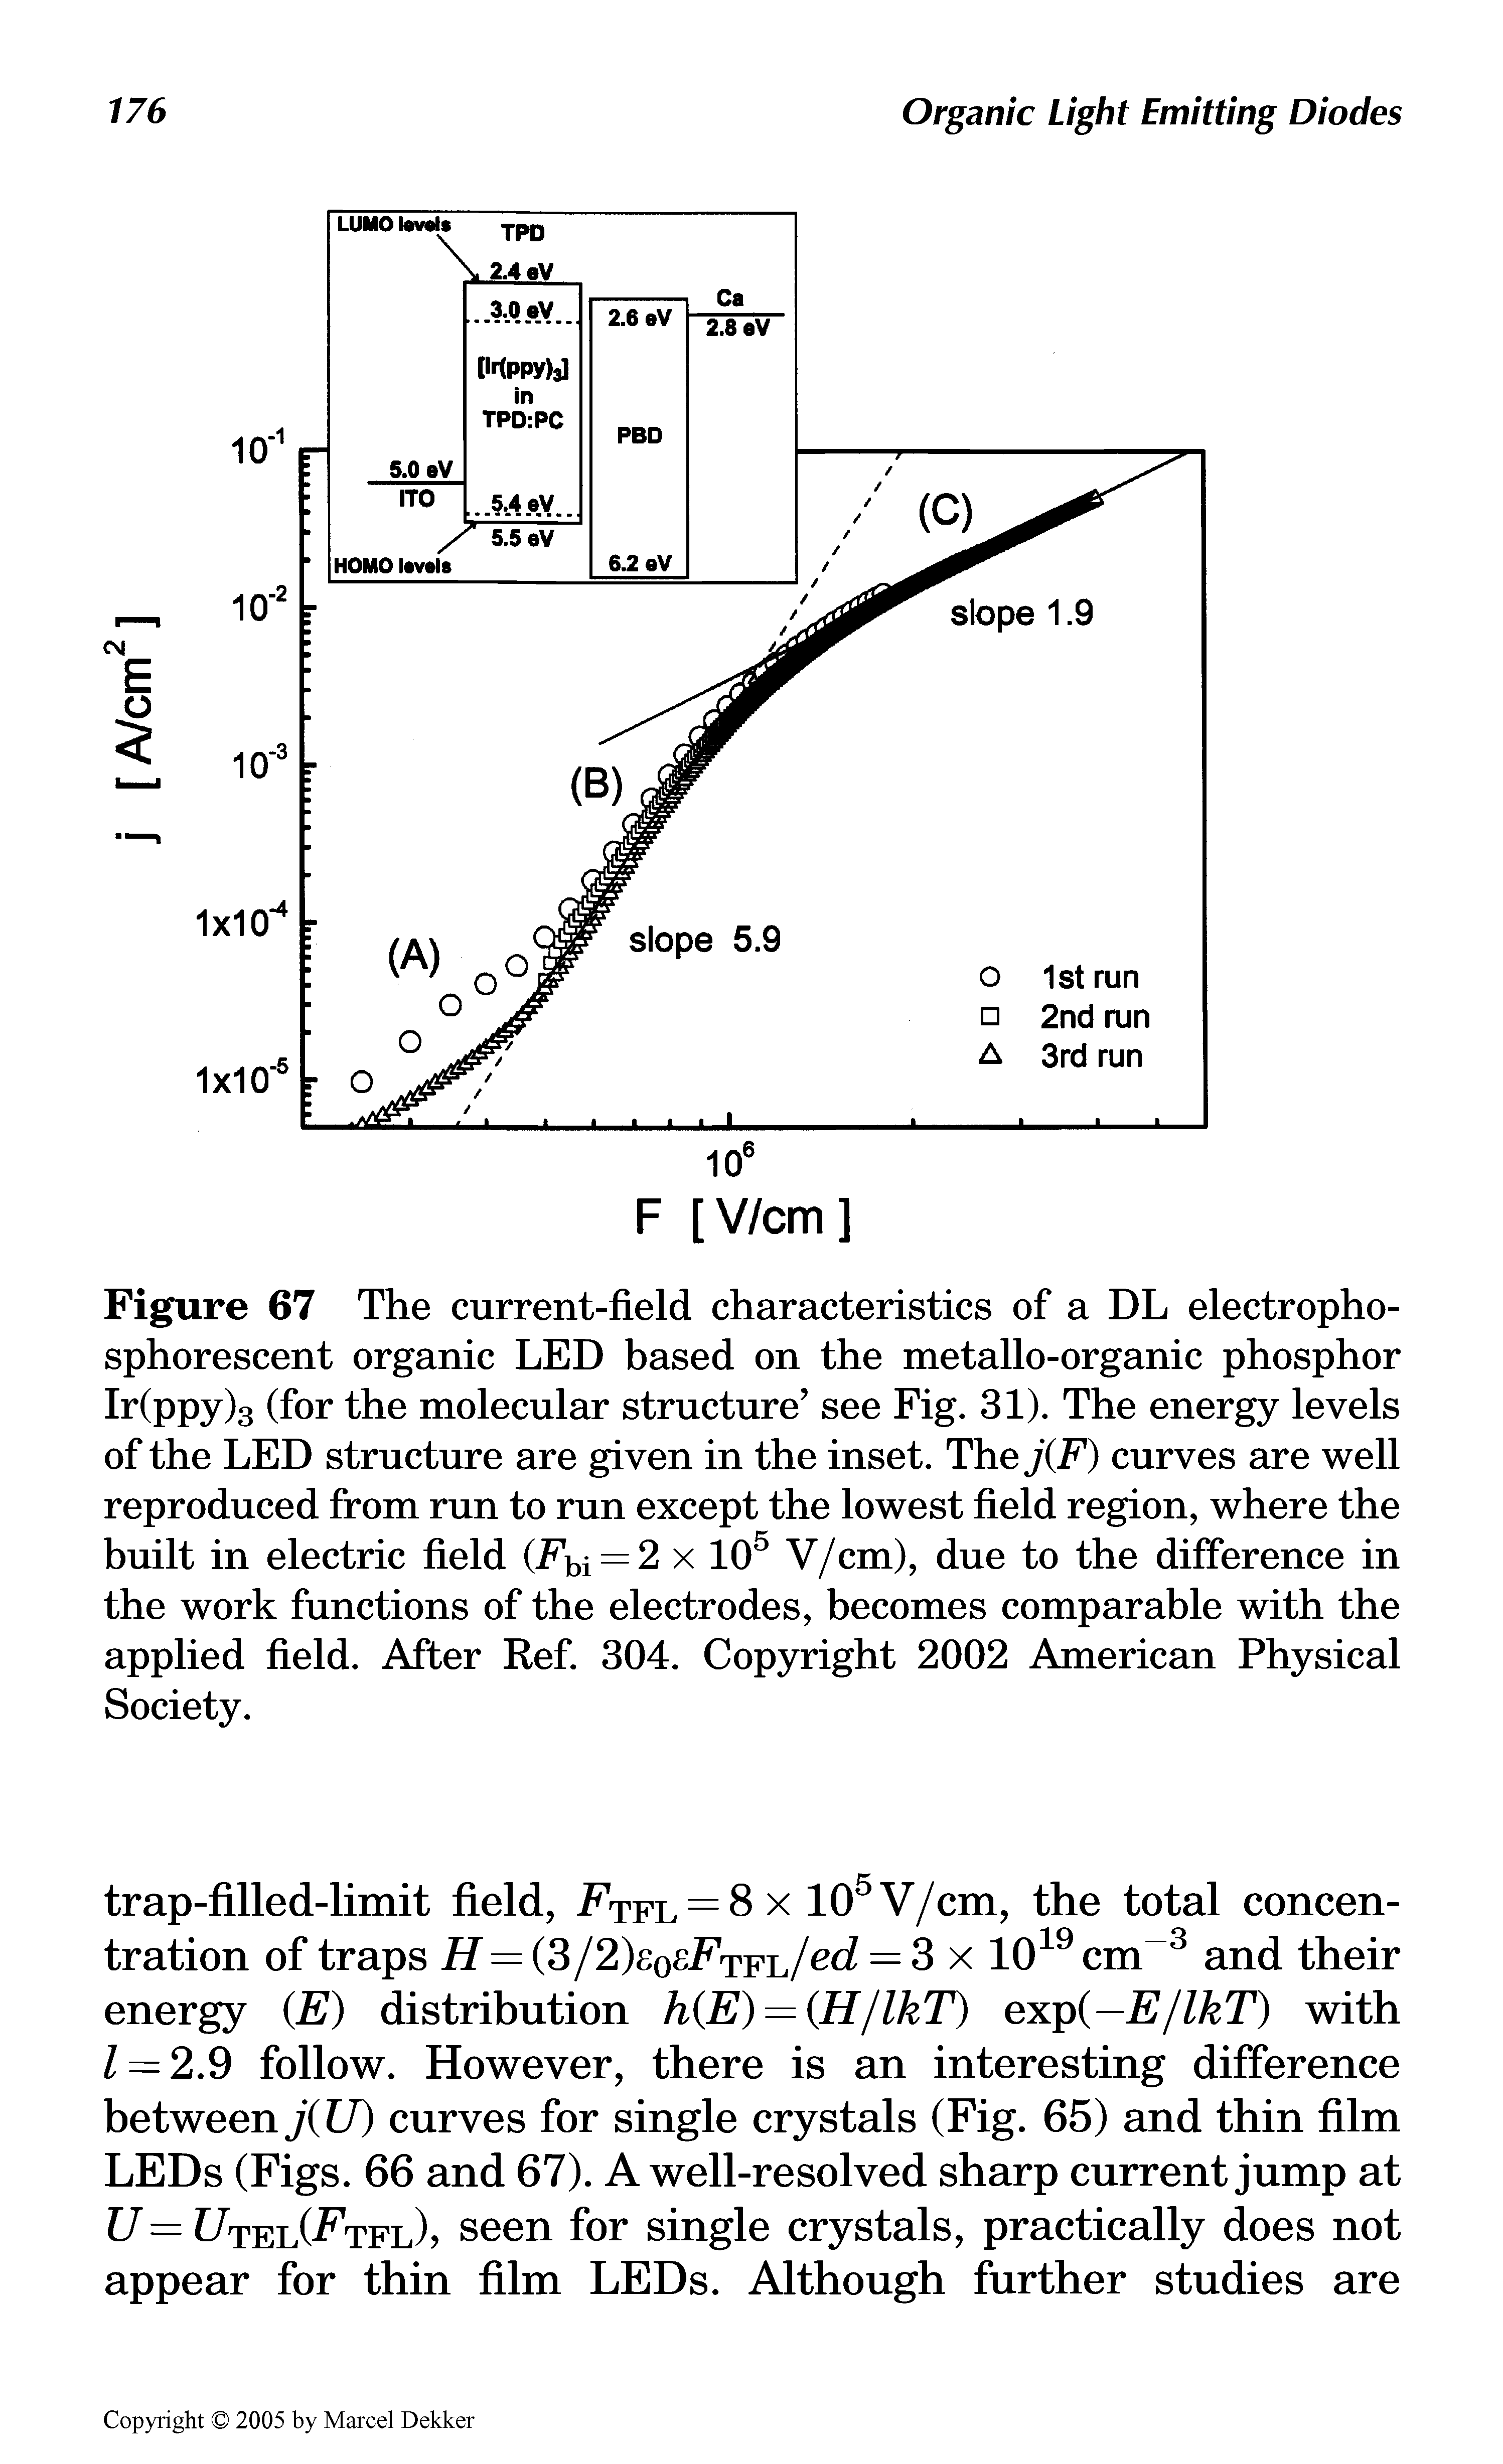 Figure 67 The current-field characteristics of a DL electropho-sphorescent organic LED based on the metallo-organic phosphor Ir(ppy)3 (for the molecular structure see Fig. 31). The energy levels of the LED structure are given in the inset. The j(F) curves are well reproduced from run to run except the lowest field region, where the built in electric field (.Fbi = 2 x 105 V/cm), due to the difference in the work functions of the electrodes, becomes comparable with the applied field. After Ref. 304. Copyright 2002 American Physical Society.